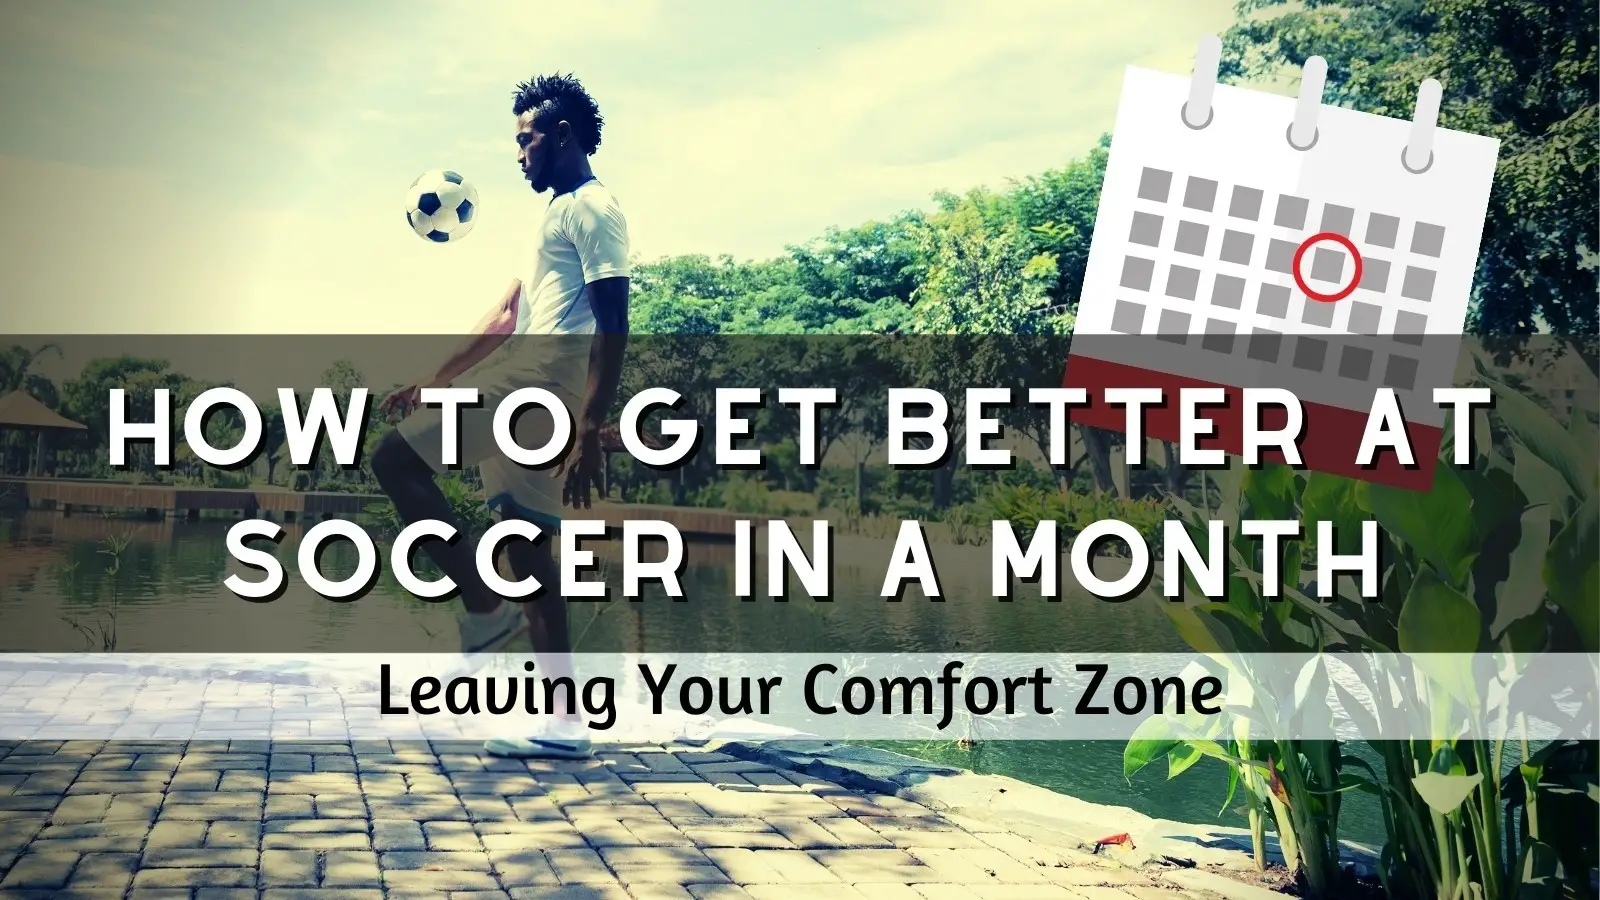 How To Get Better At Soccer In A Month: Leaving Your Comfort Zone